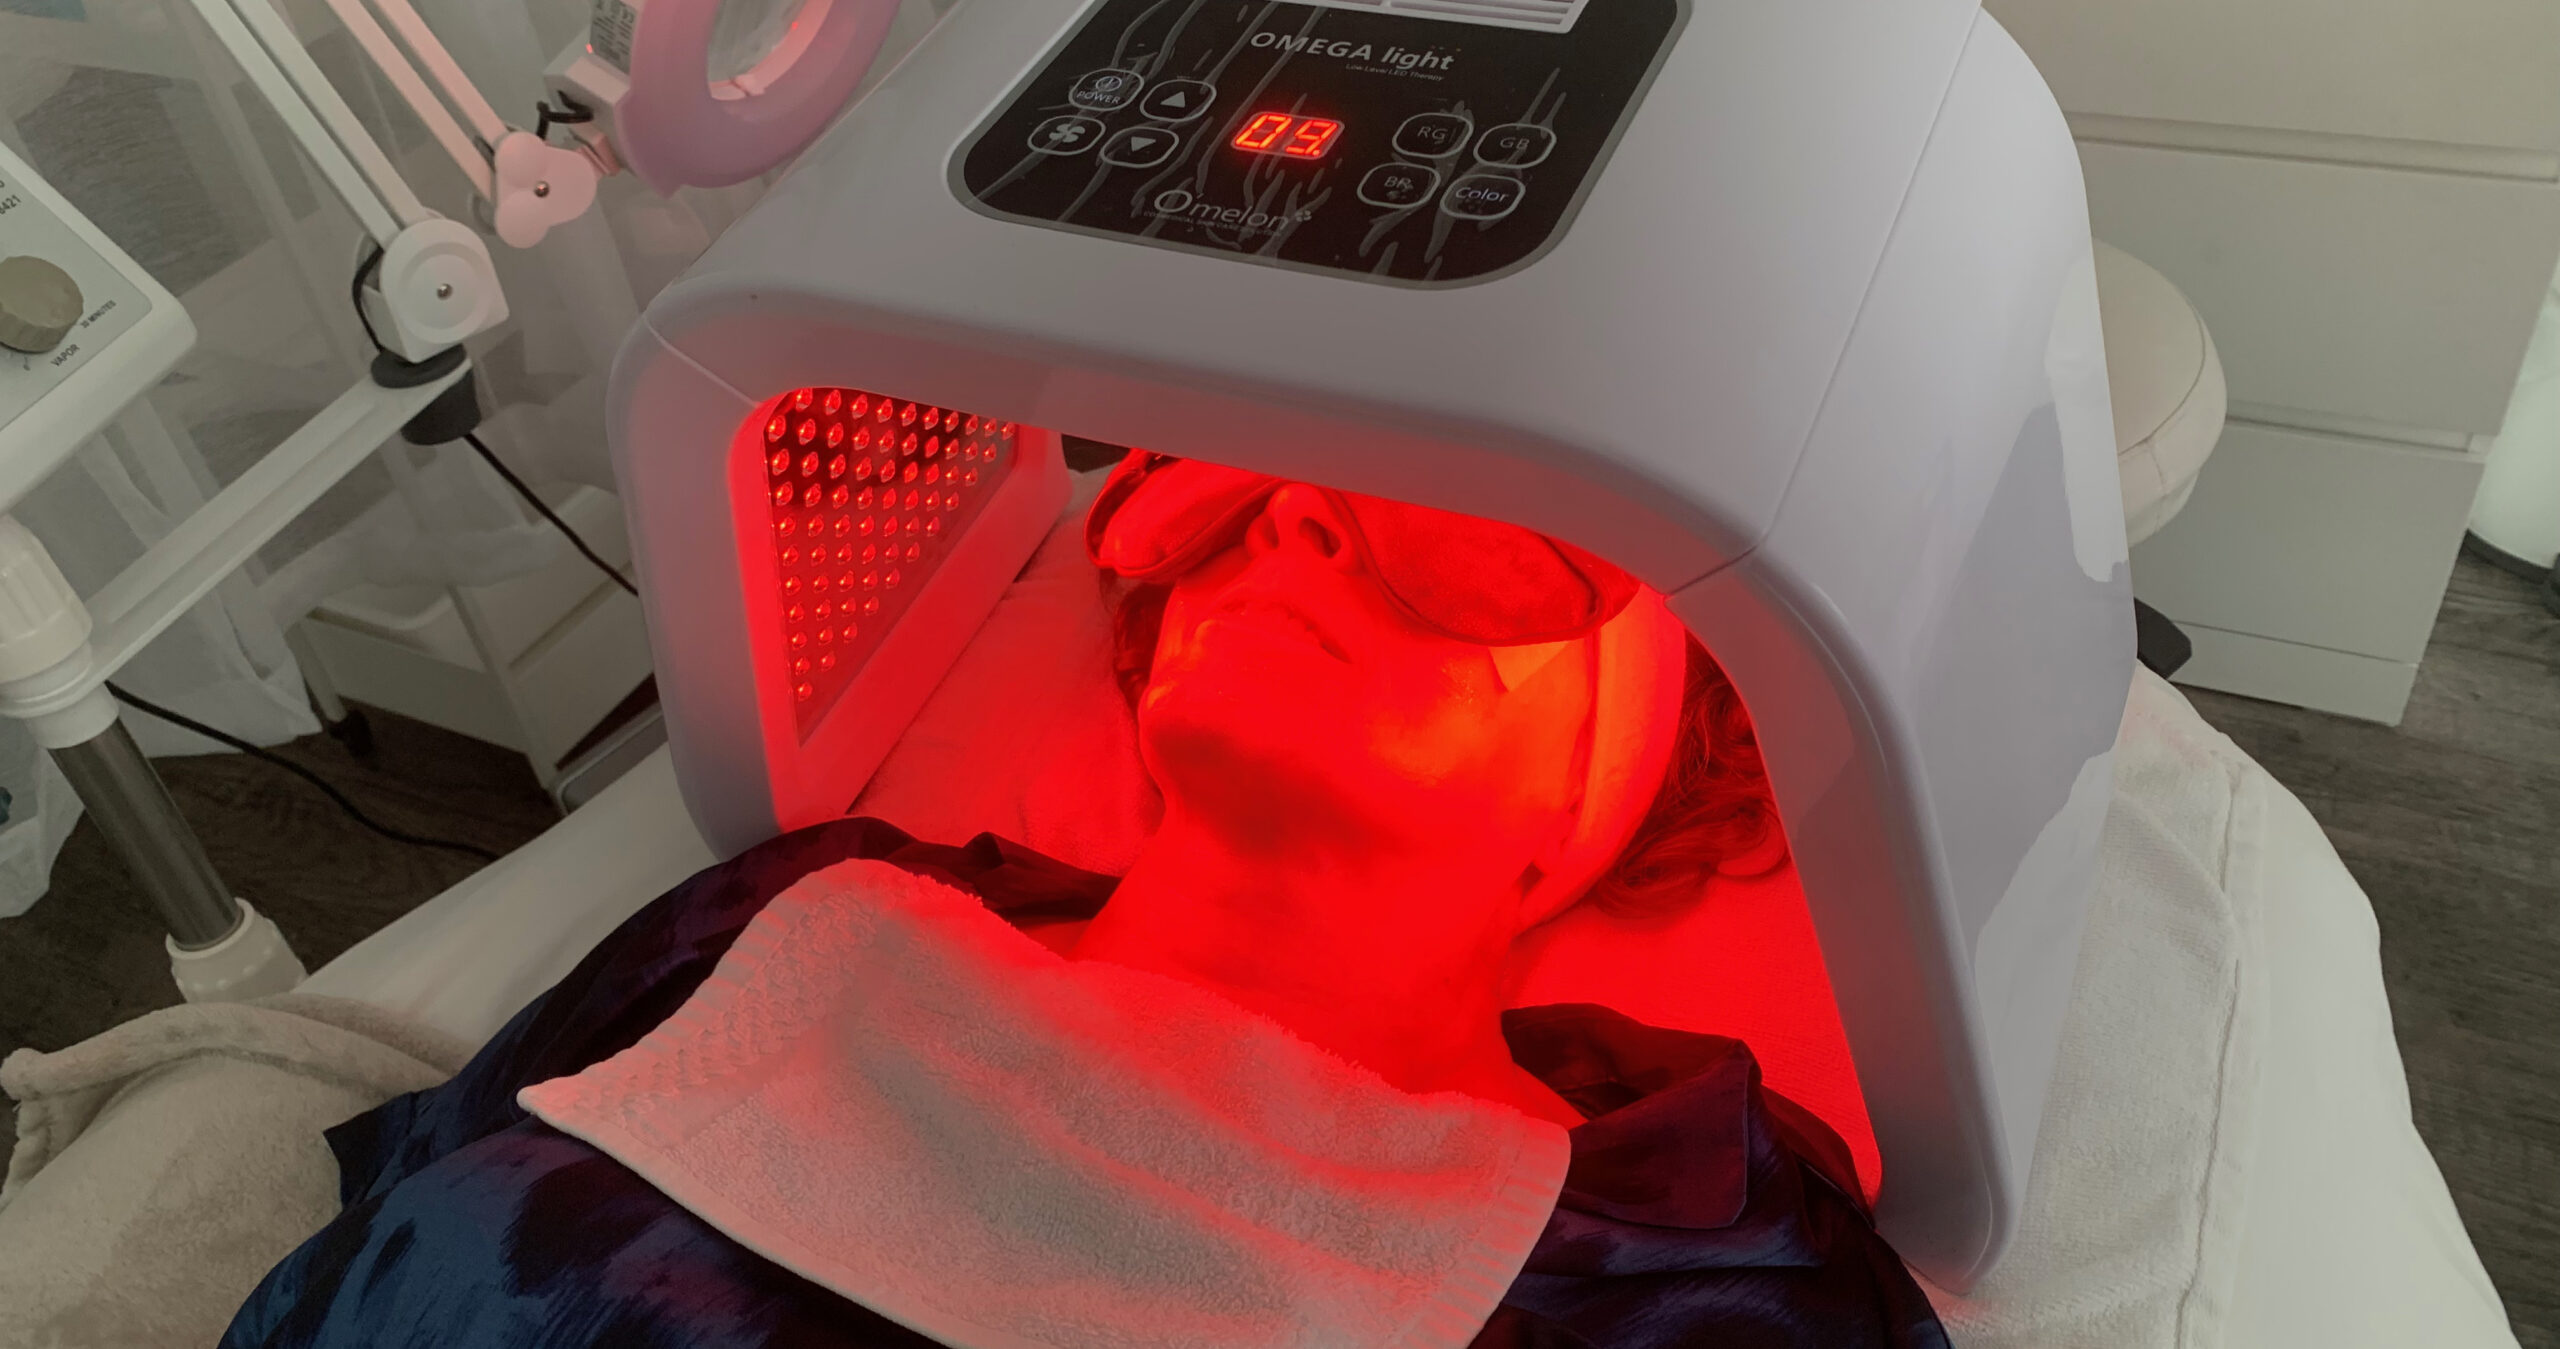 Brenda Coffee Getting Red LED Light Therapy